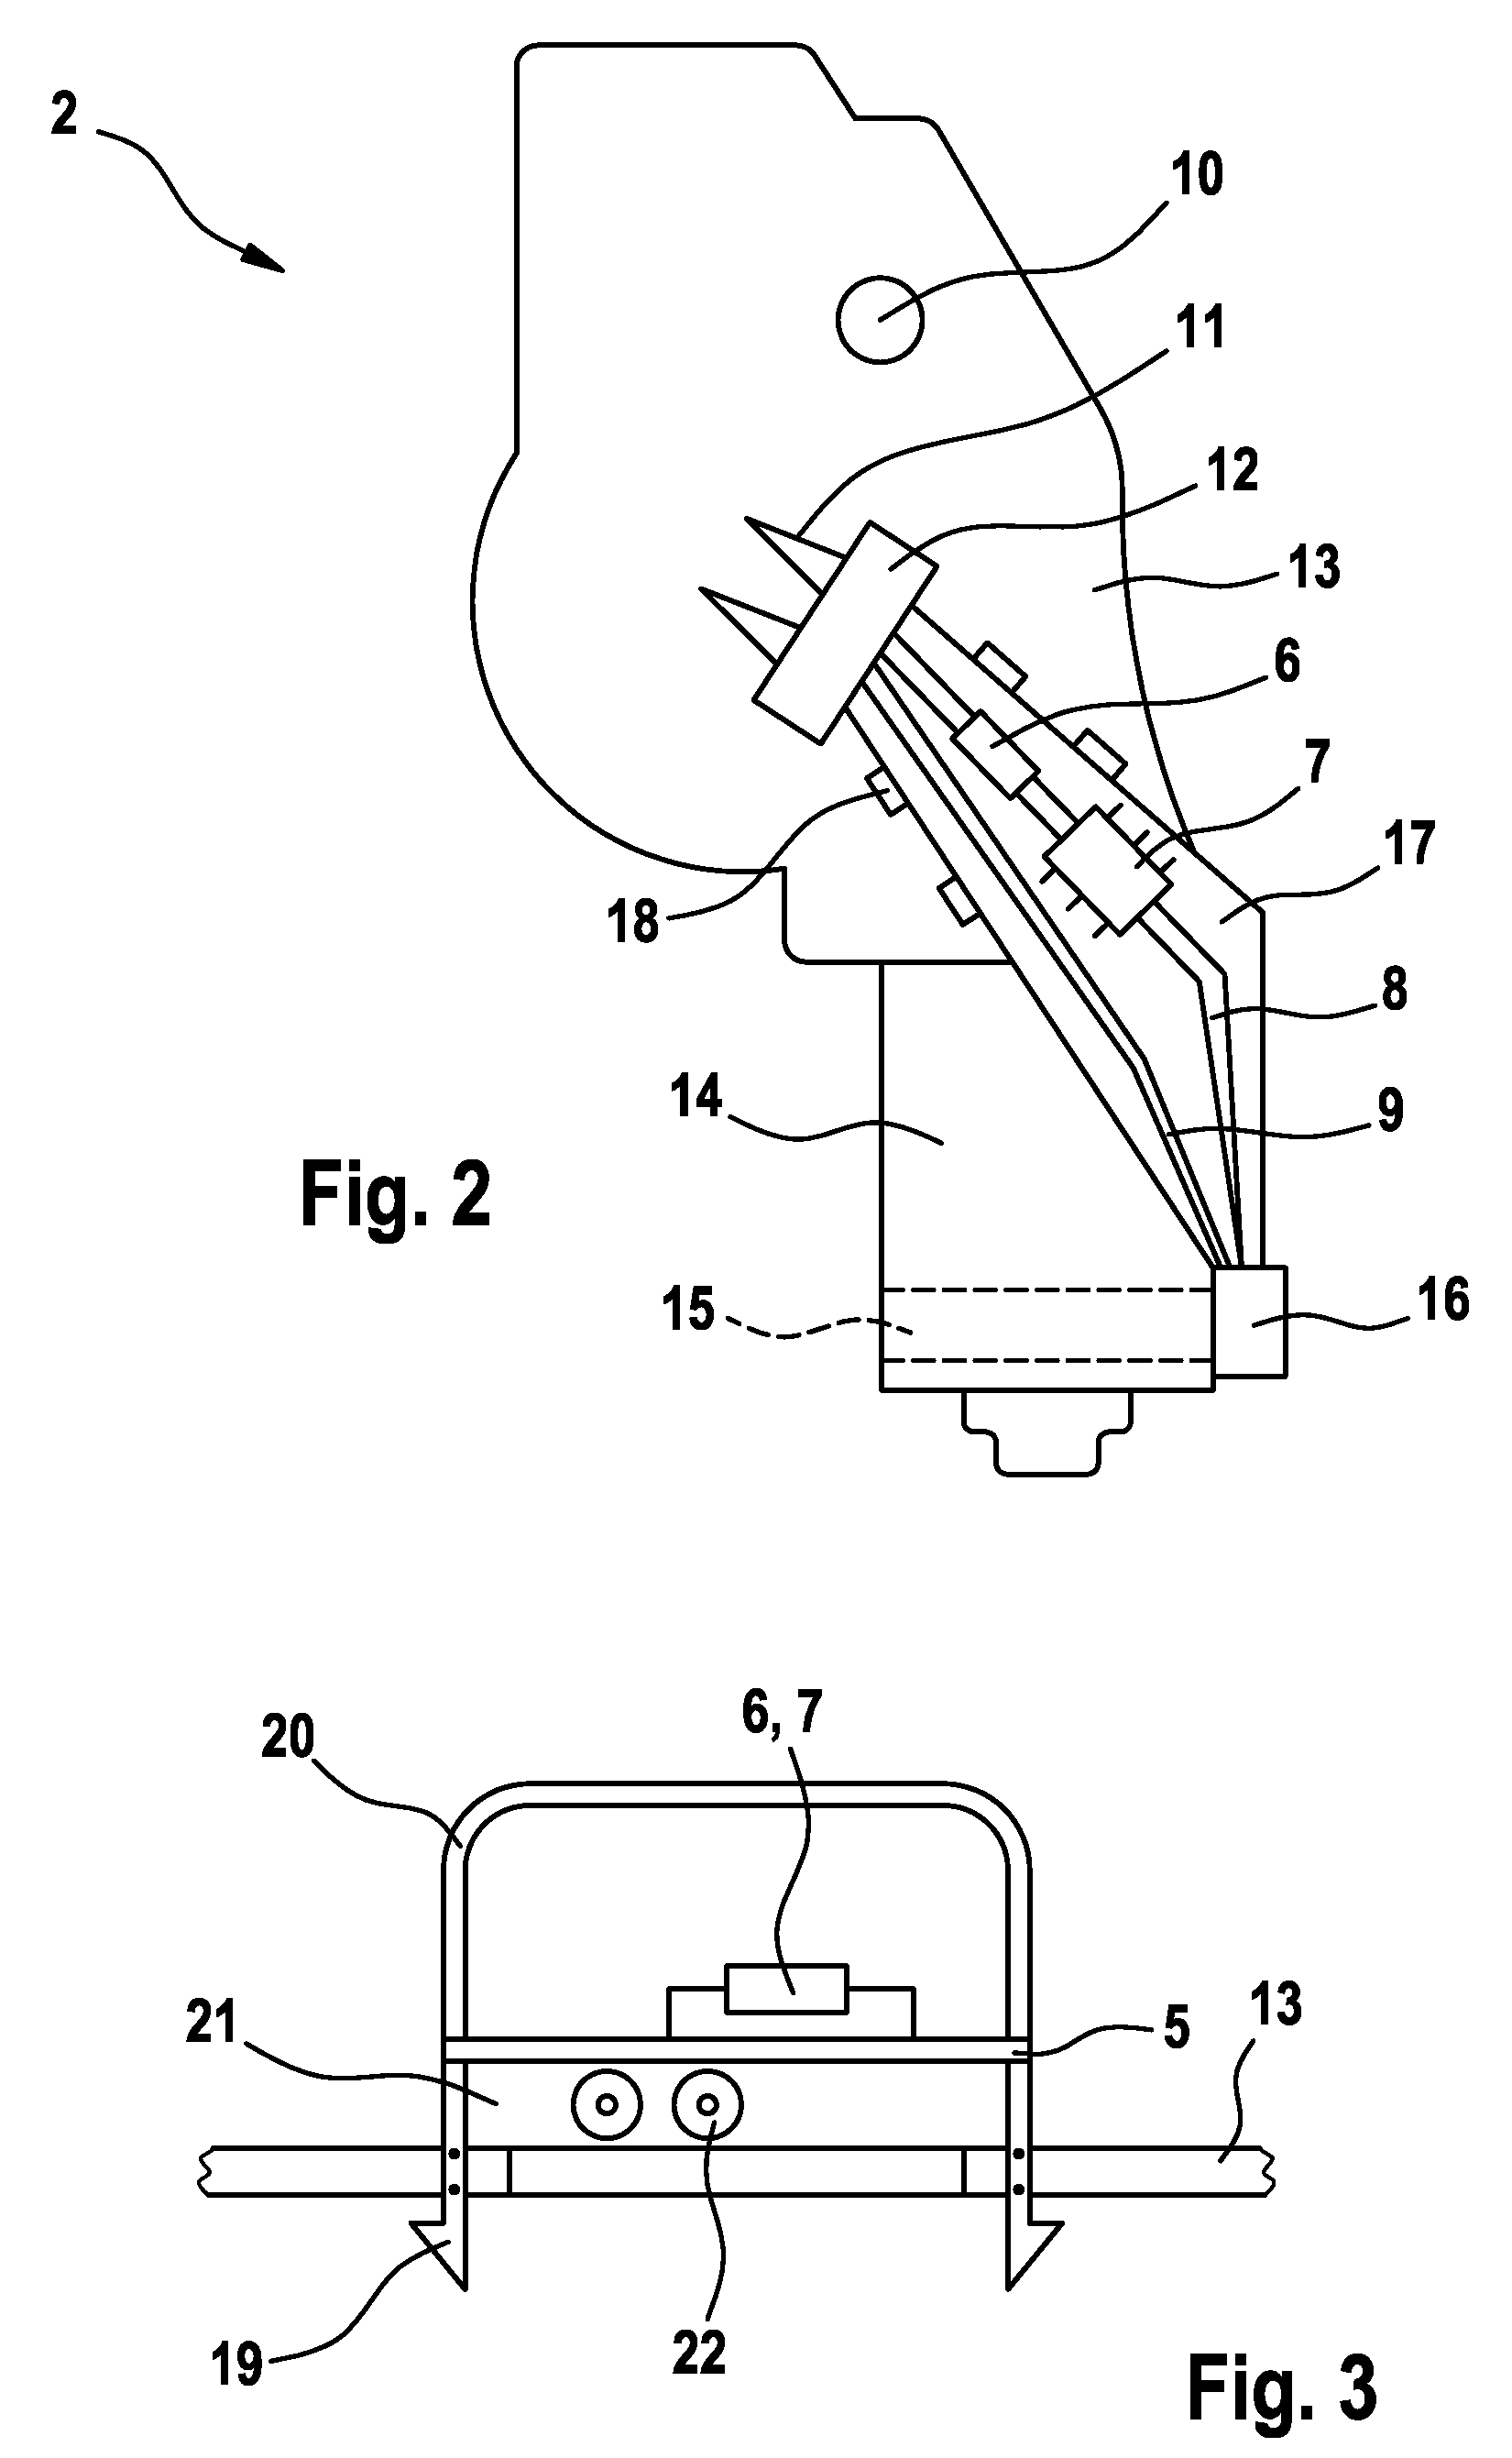 Connecting support for holding motor electronics